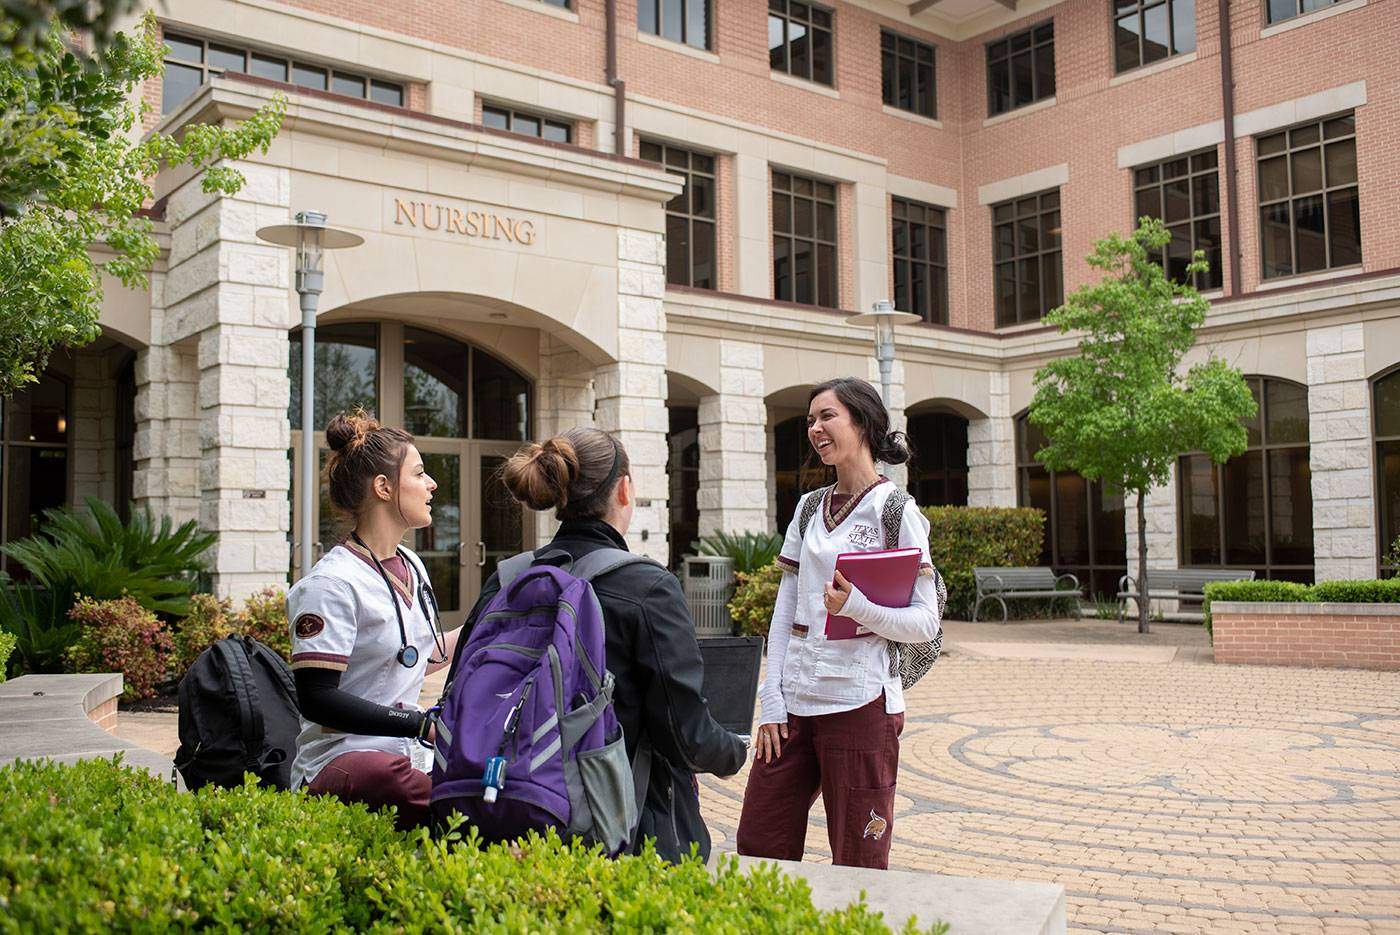 Group of students having a conversation in front of St. David's School of Nursing building.